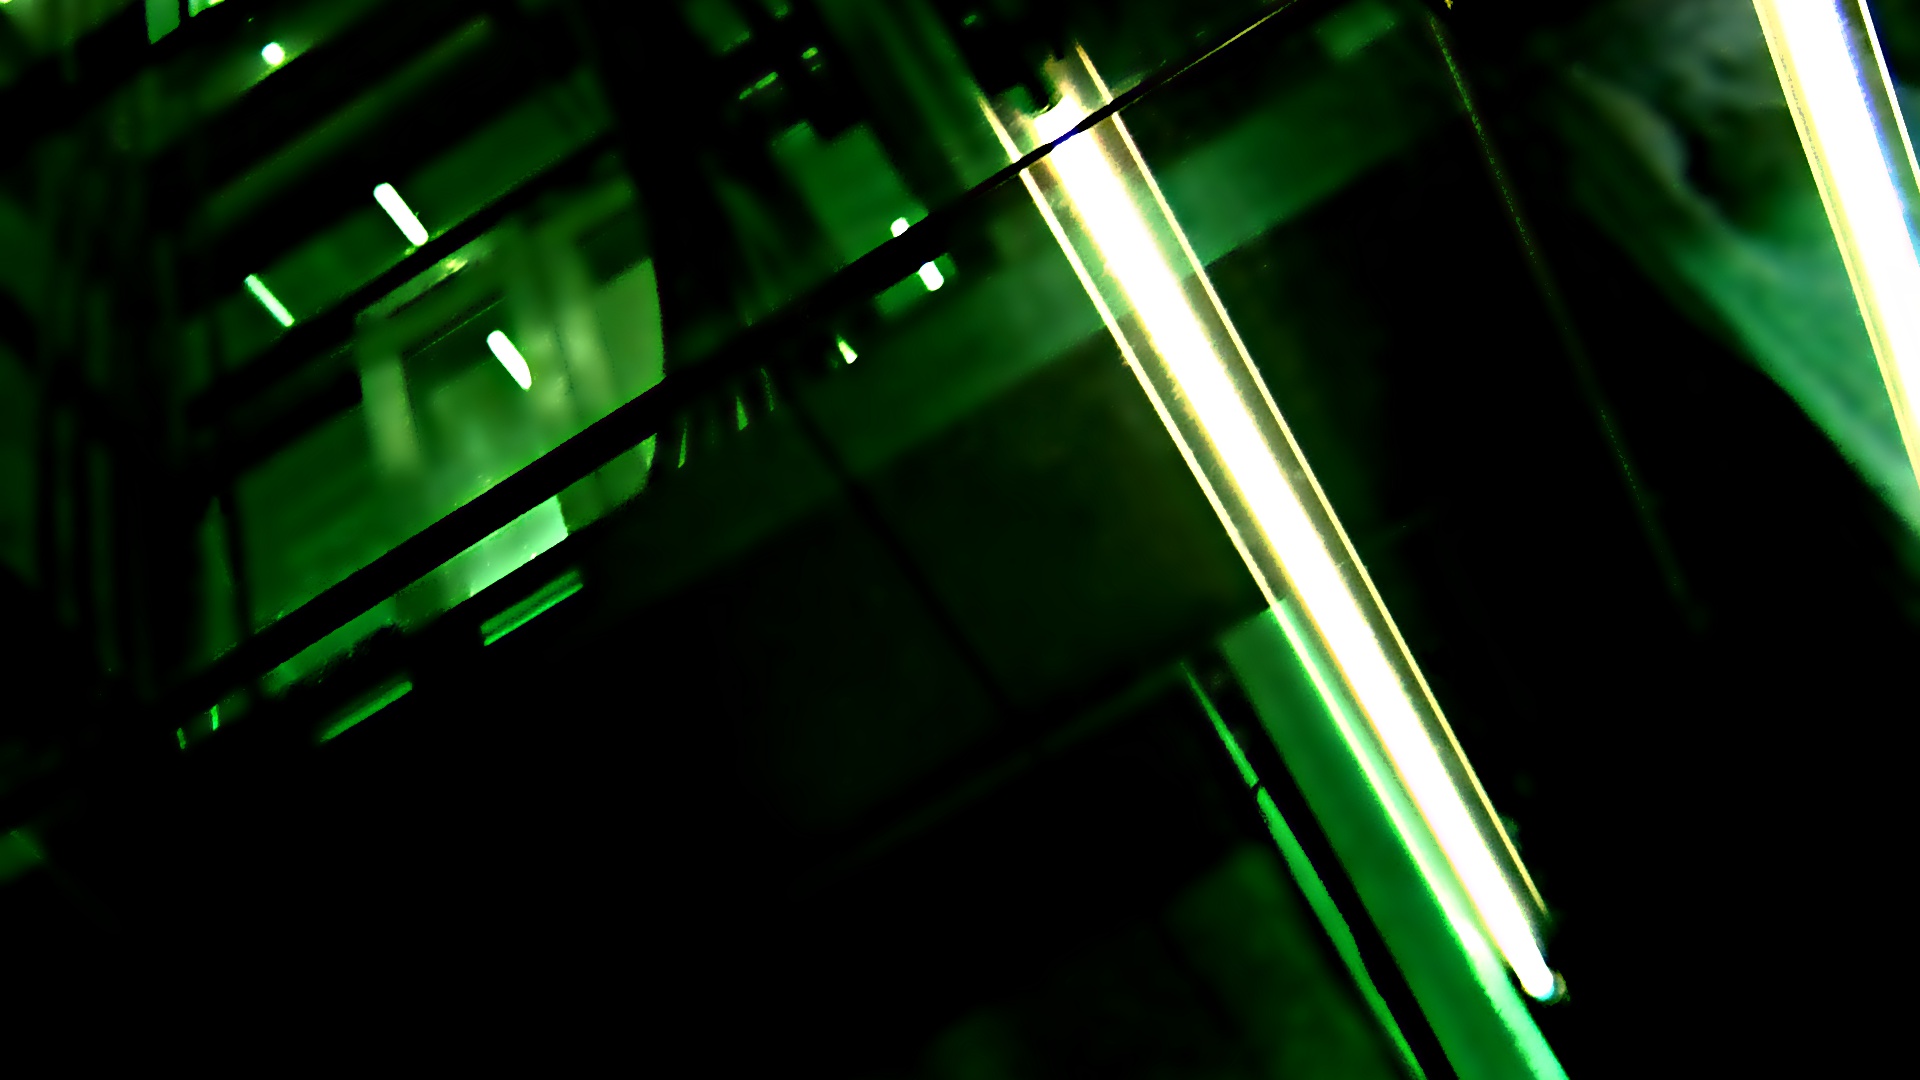 Dark Green Iphone Wallpaper with High Resolution 1920x1080 px 25473